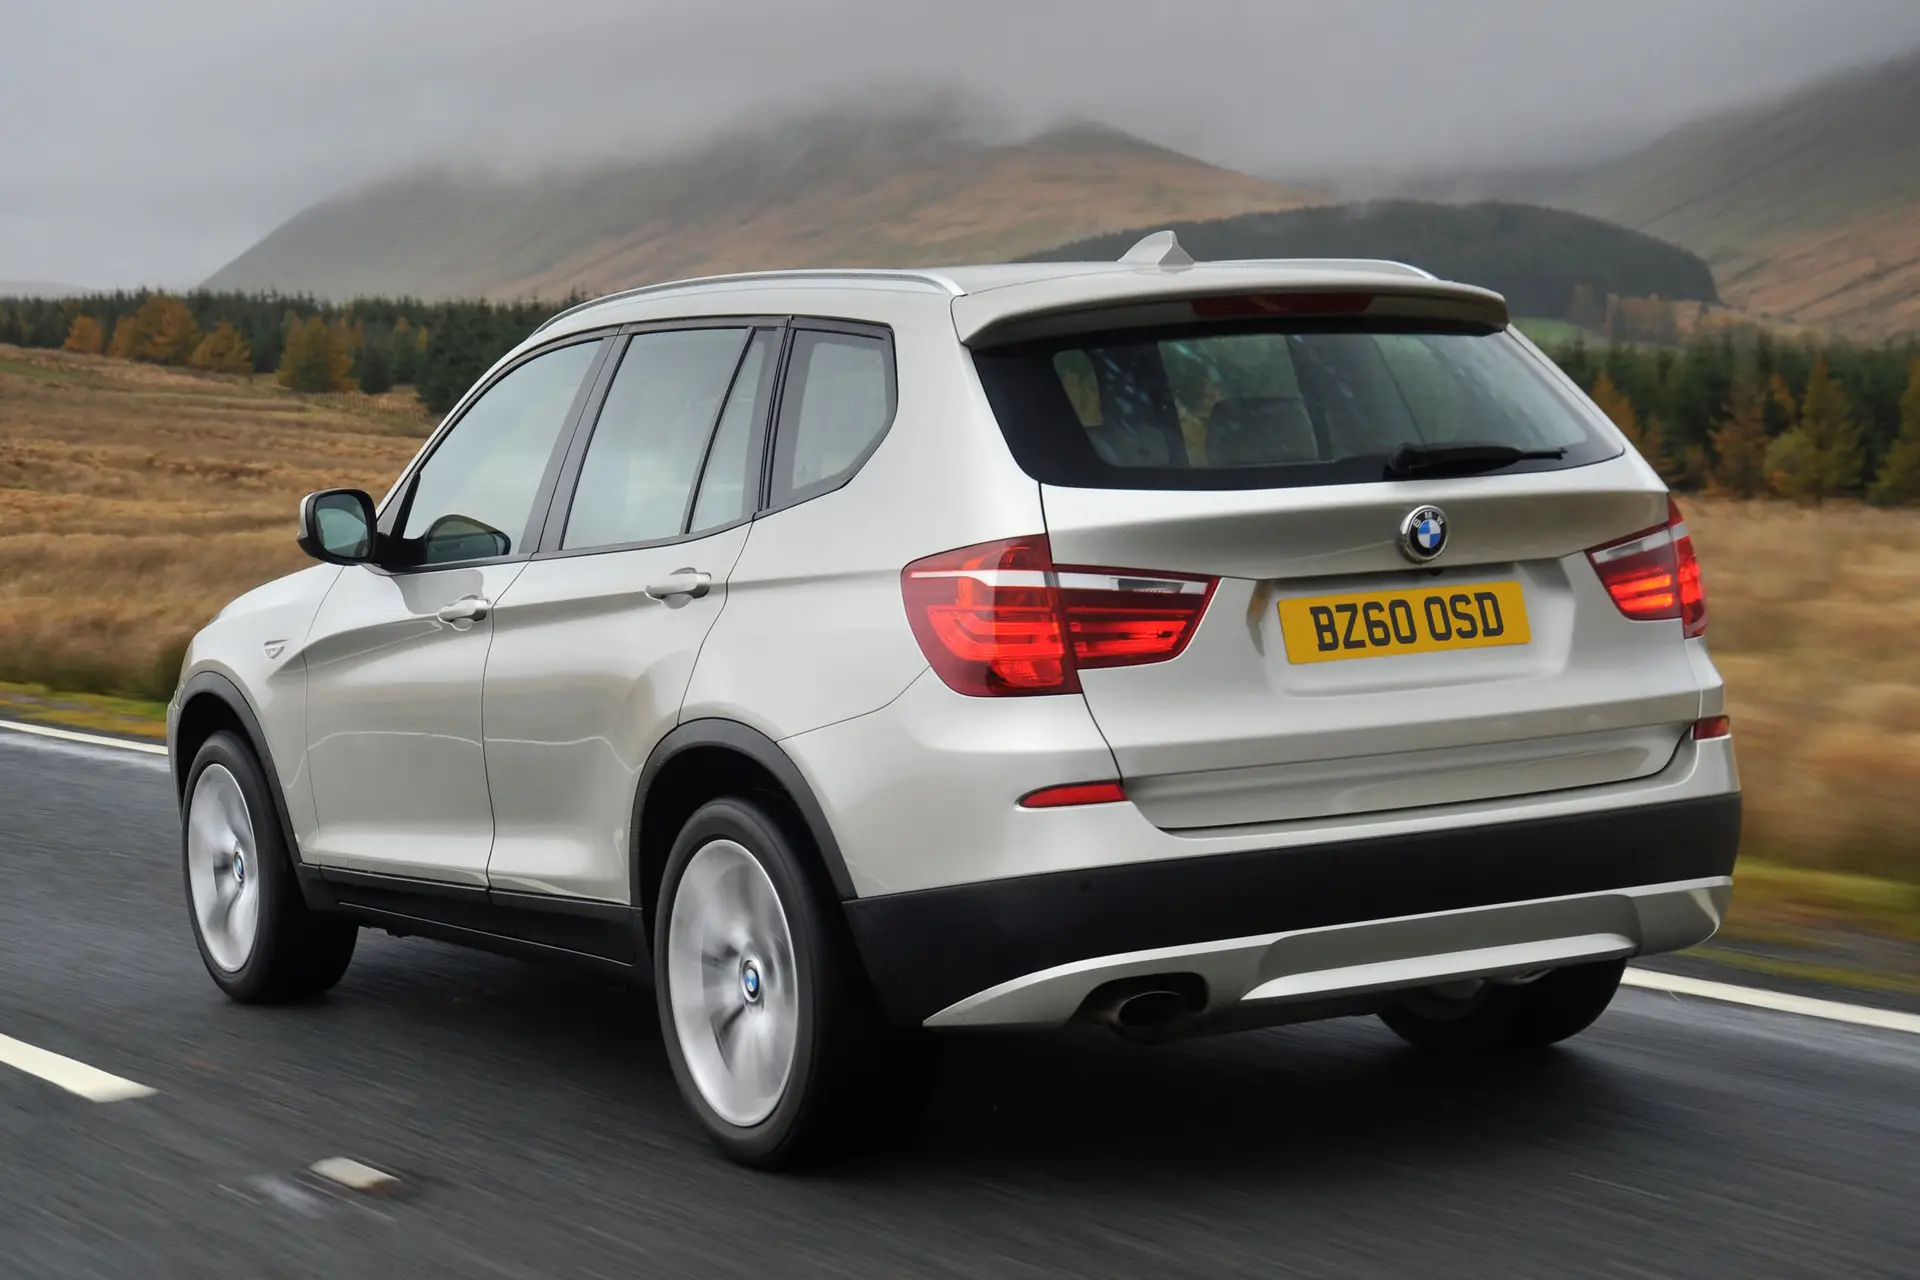 BMW X3 (2010-2018) Review: Exterior rear three quarter photo of the BMW X3 on the road